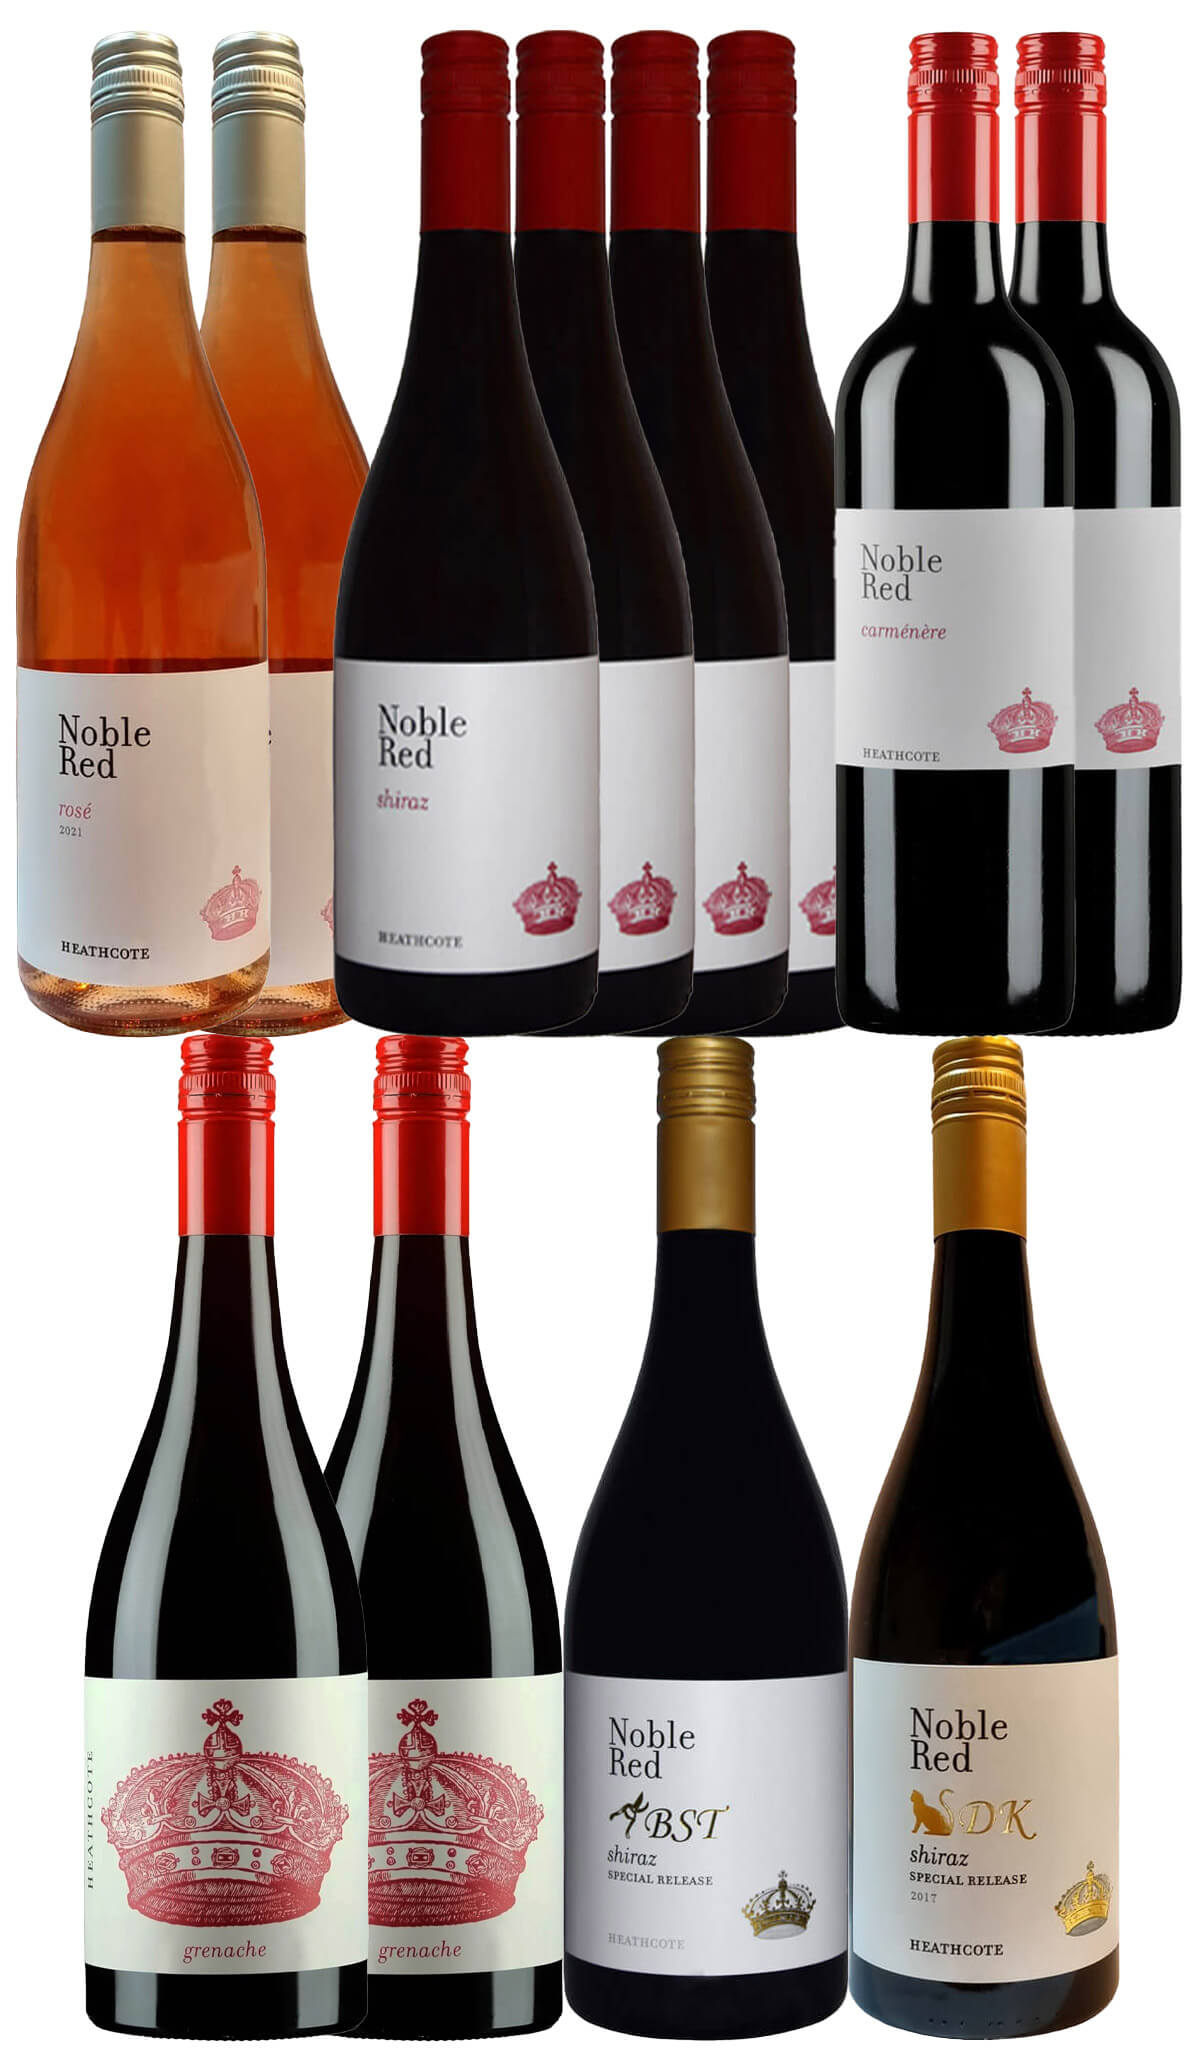 Find out more or buy Noble Red Wines - Mixed Dozen Bundle online at Wine Sellers Direct - Australia’s independent liquor specialists.